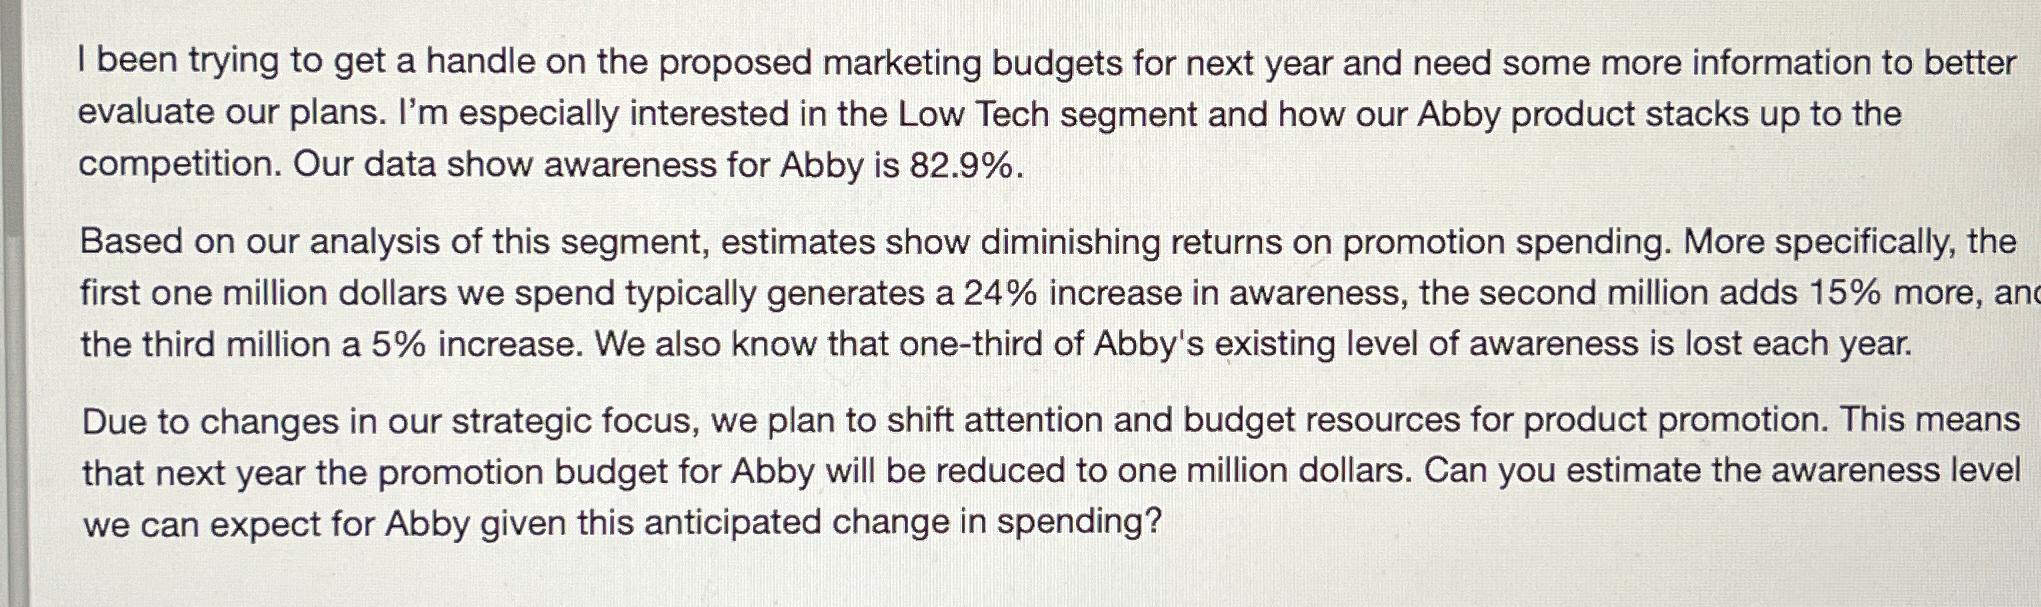 I been trying to get a handle on the proposed marketing budgets for next year and need some more information